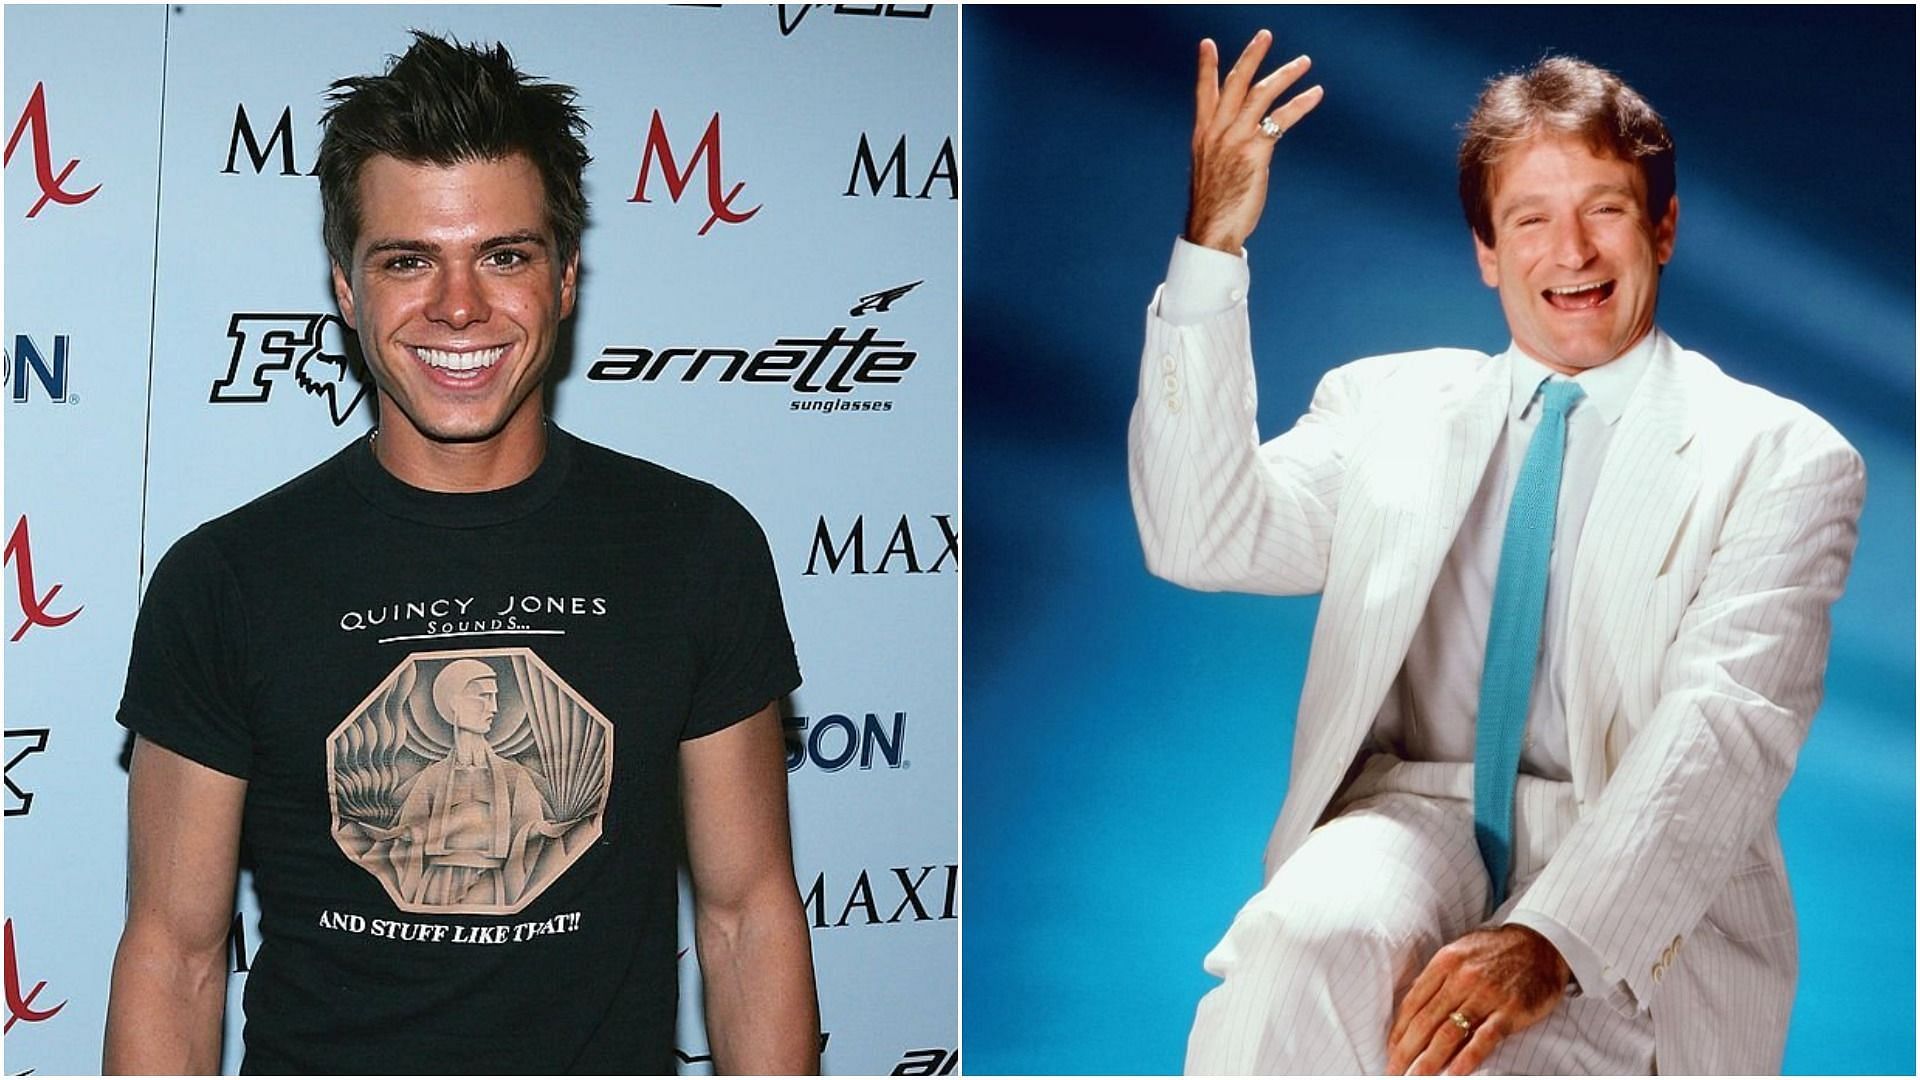 Matthew Lawrence stayed away from drugs after being advised by Robin Williams (Images via Mark Mainz and Harry Langdon/Getty Images)